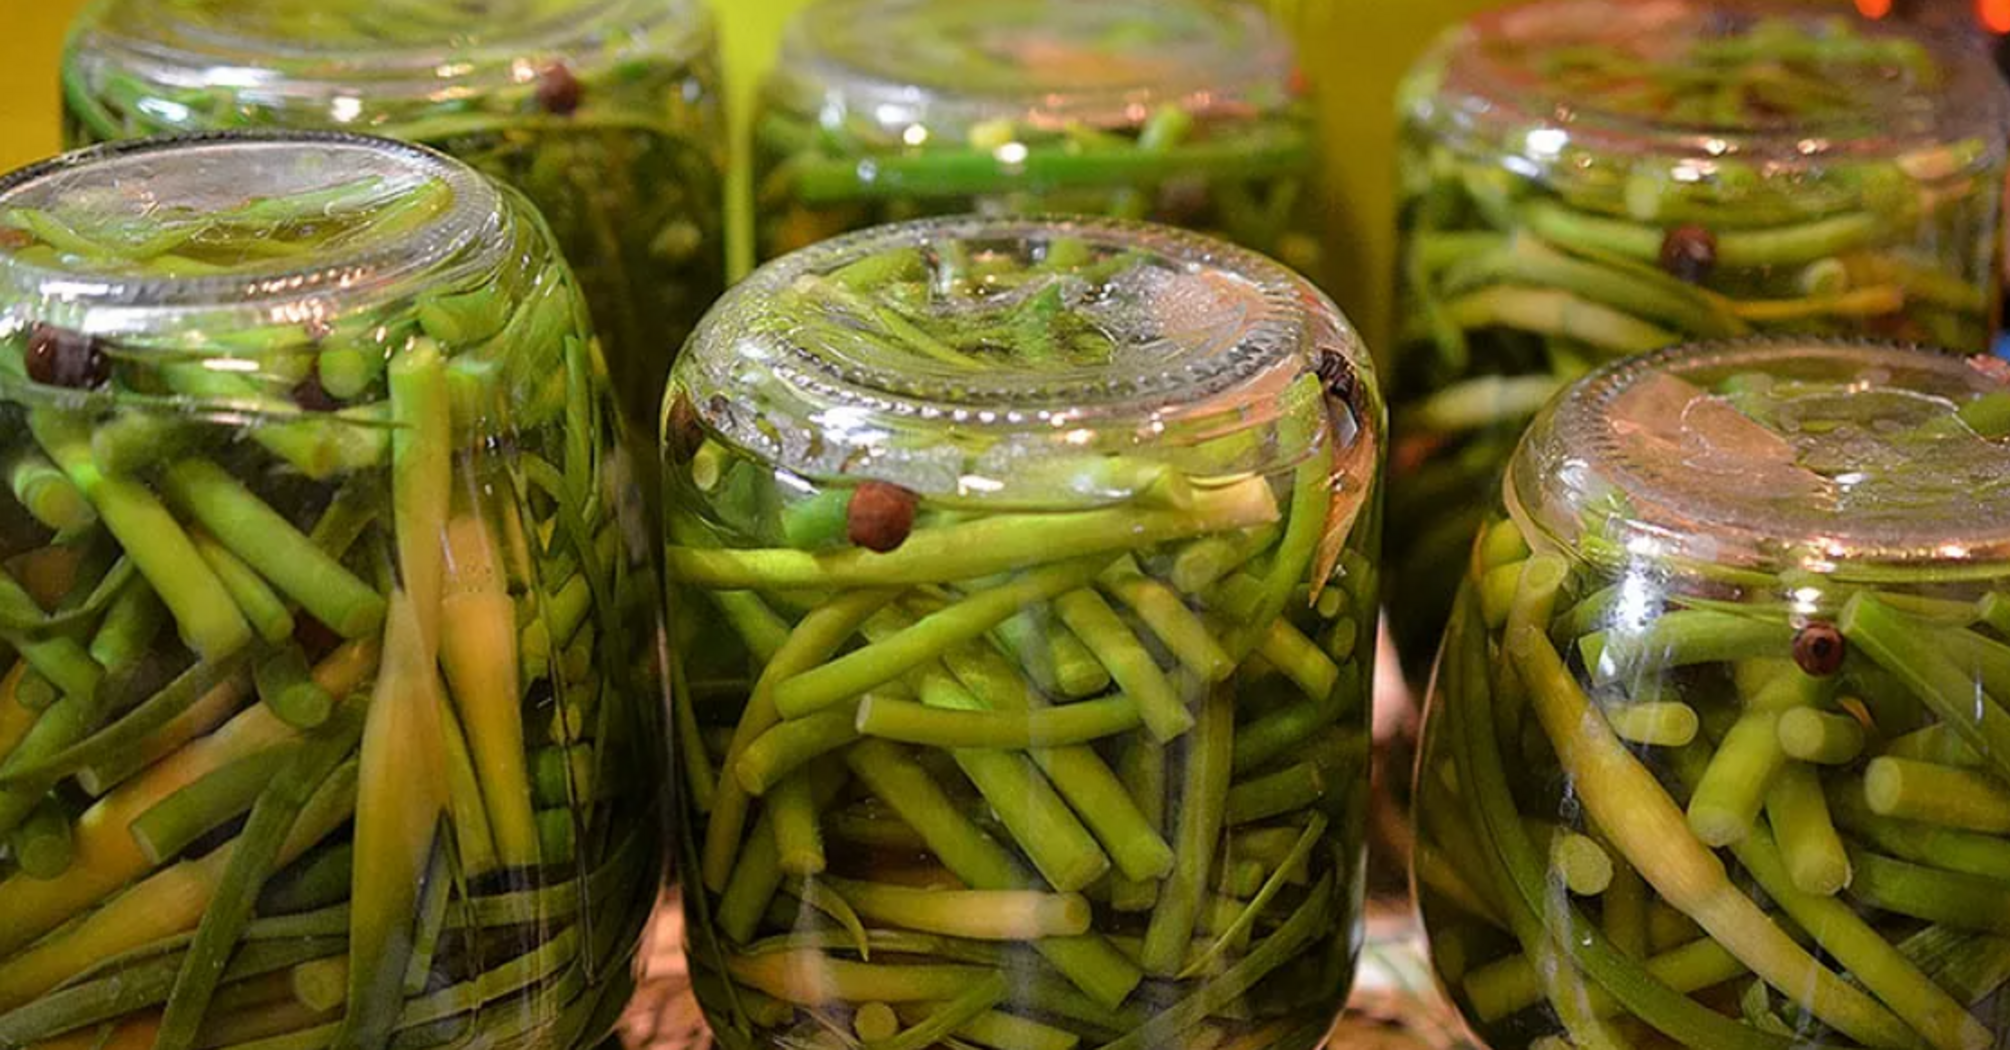 Pickled garlic greens for the winter: a spicy snack you can not buy in a store